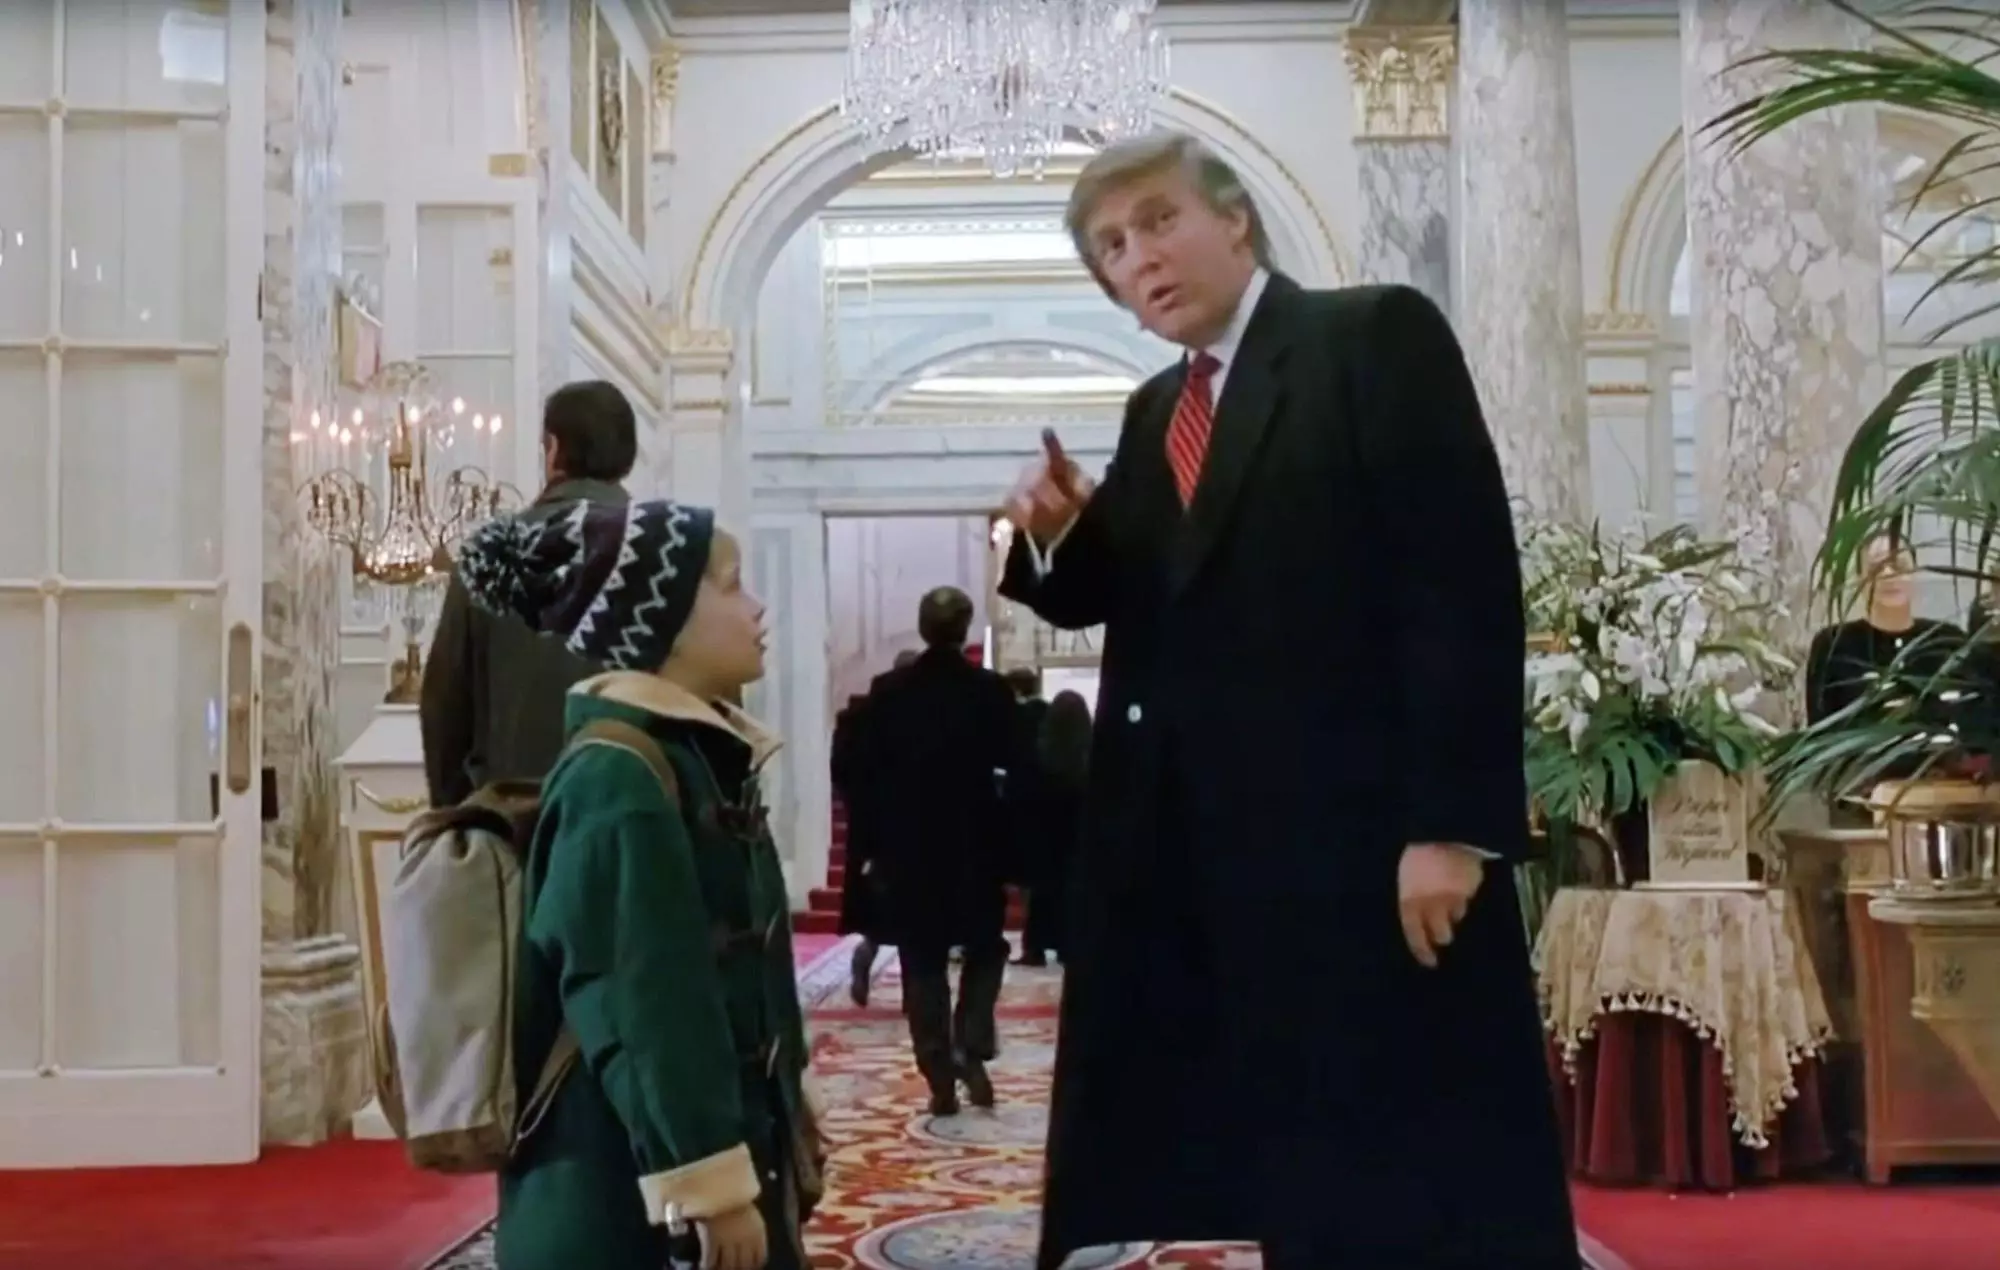 Trump famously makes a cameo in the Home Alone sequel (